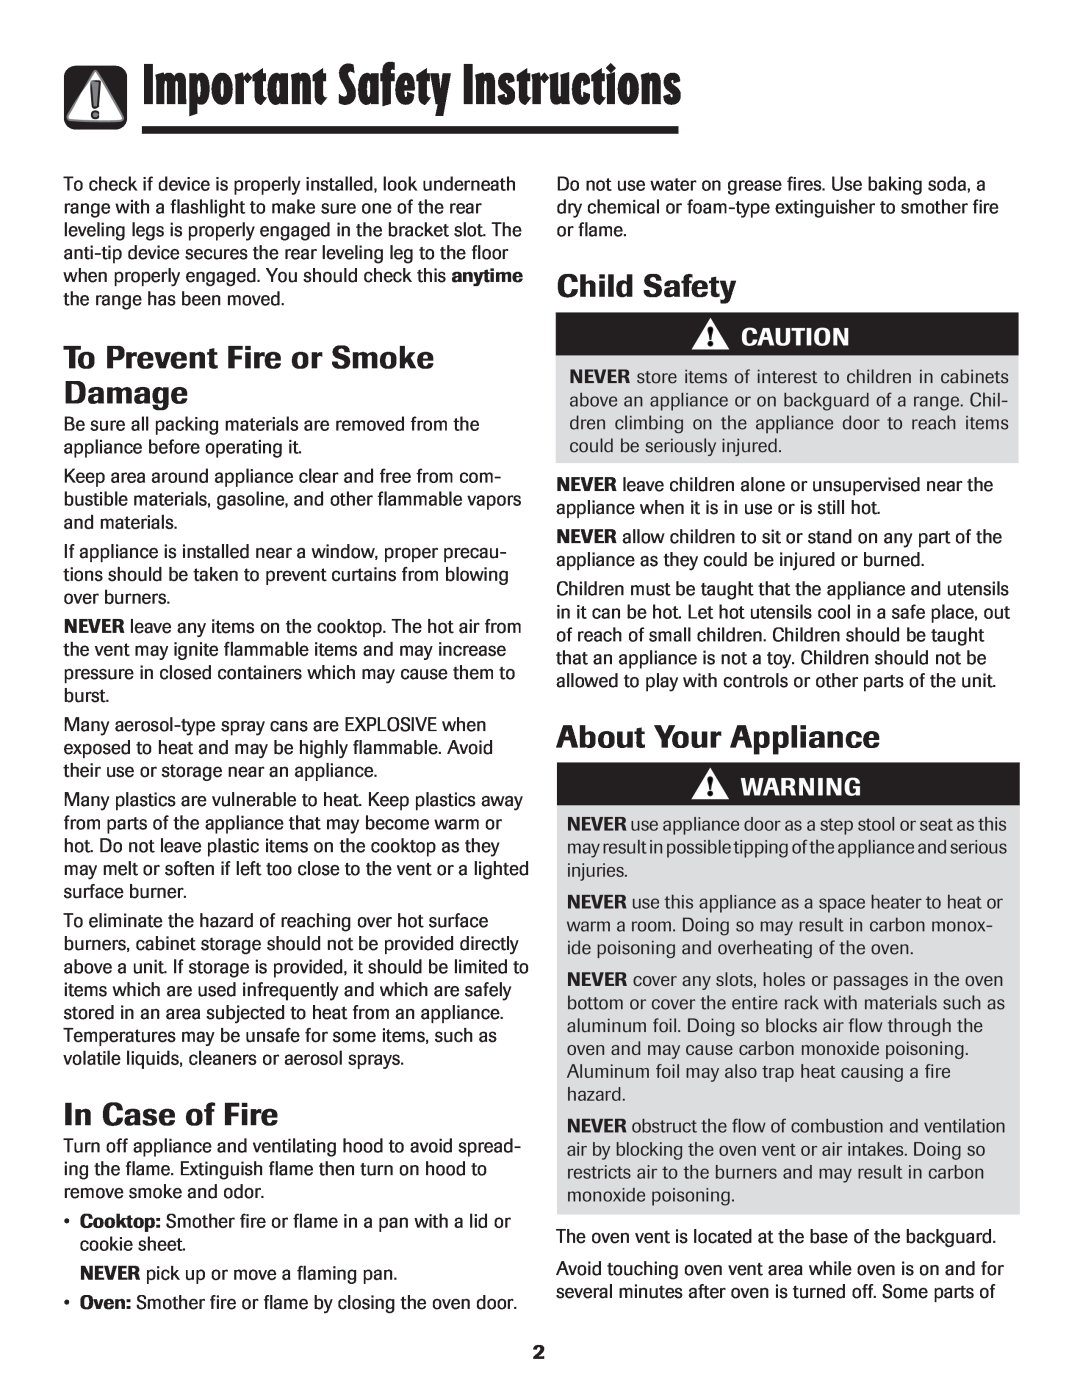 LG Electronics 800 Important Safety Instructions, To Prevent Fire or Smoke Damage, In Case of Fire, Child Safety 